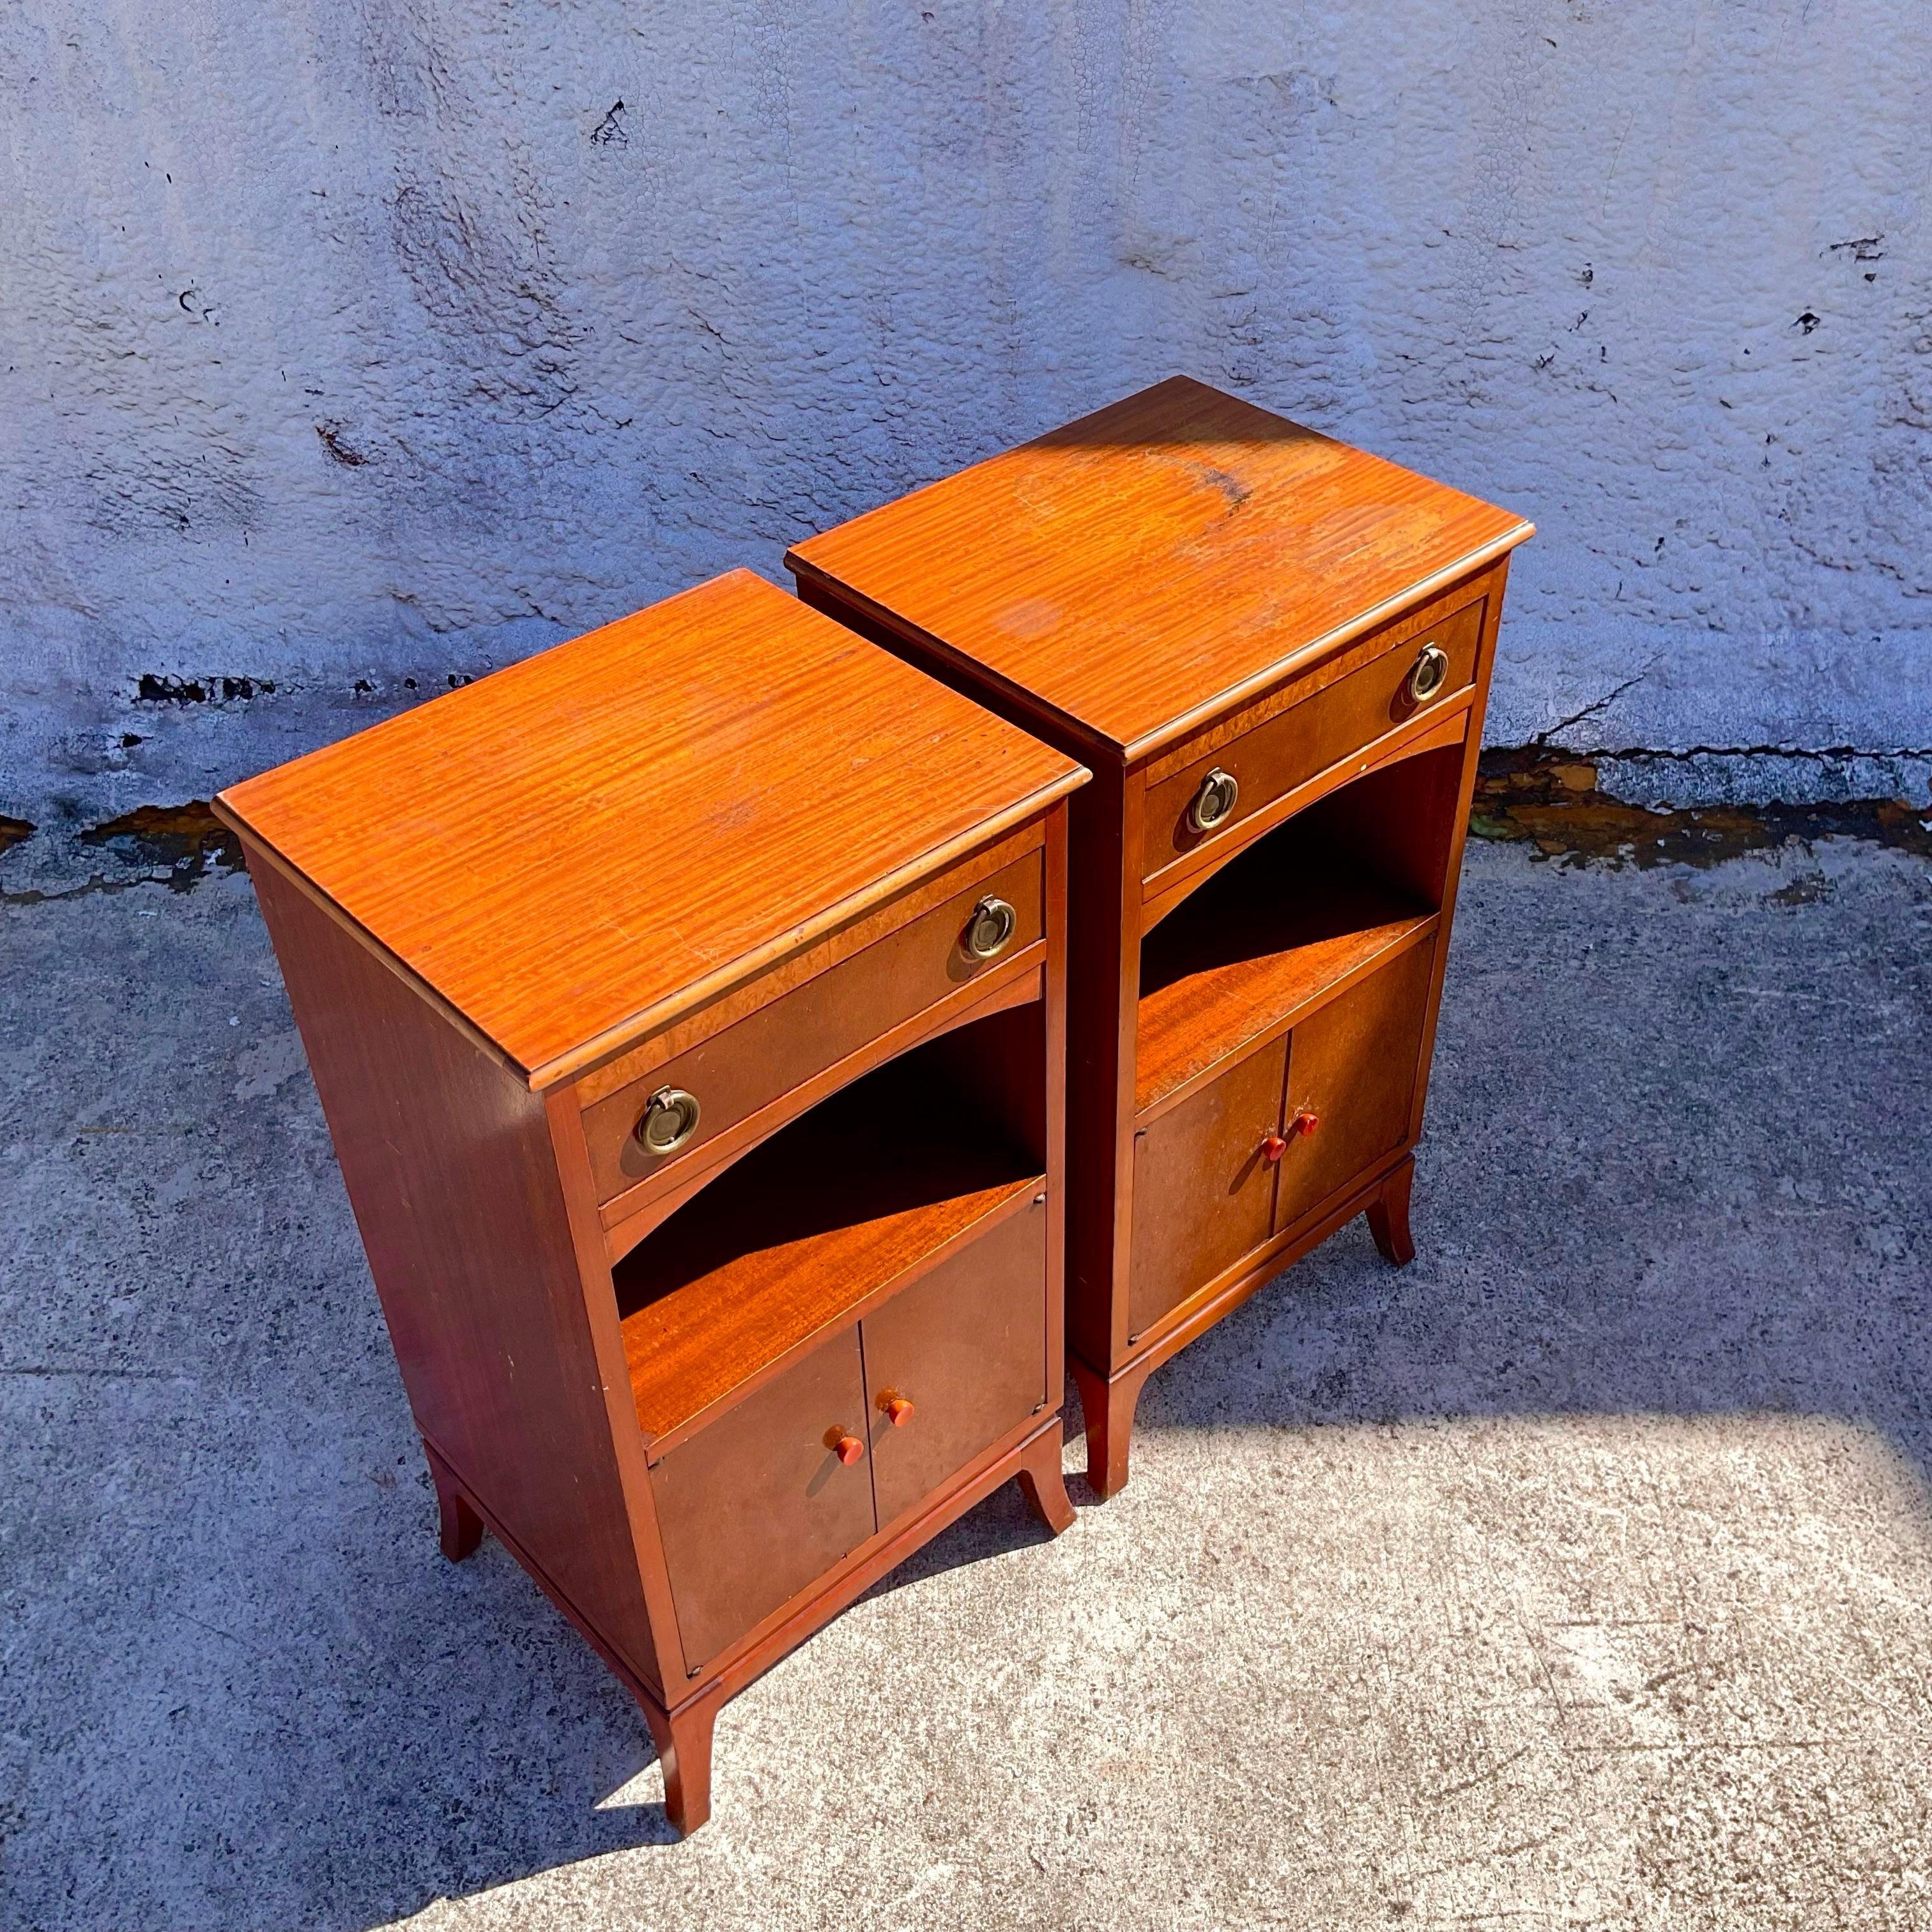 A fantastic pair of vintage John Stewart petite nightstands with a top drawer, a shelf and cabinet doors. The bakelite handles add a touch of distinction. These are beautiful nightstands that need a little TLC and then you will have real gems.